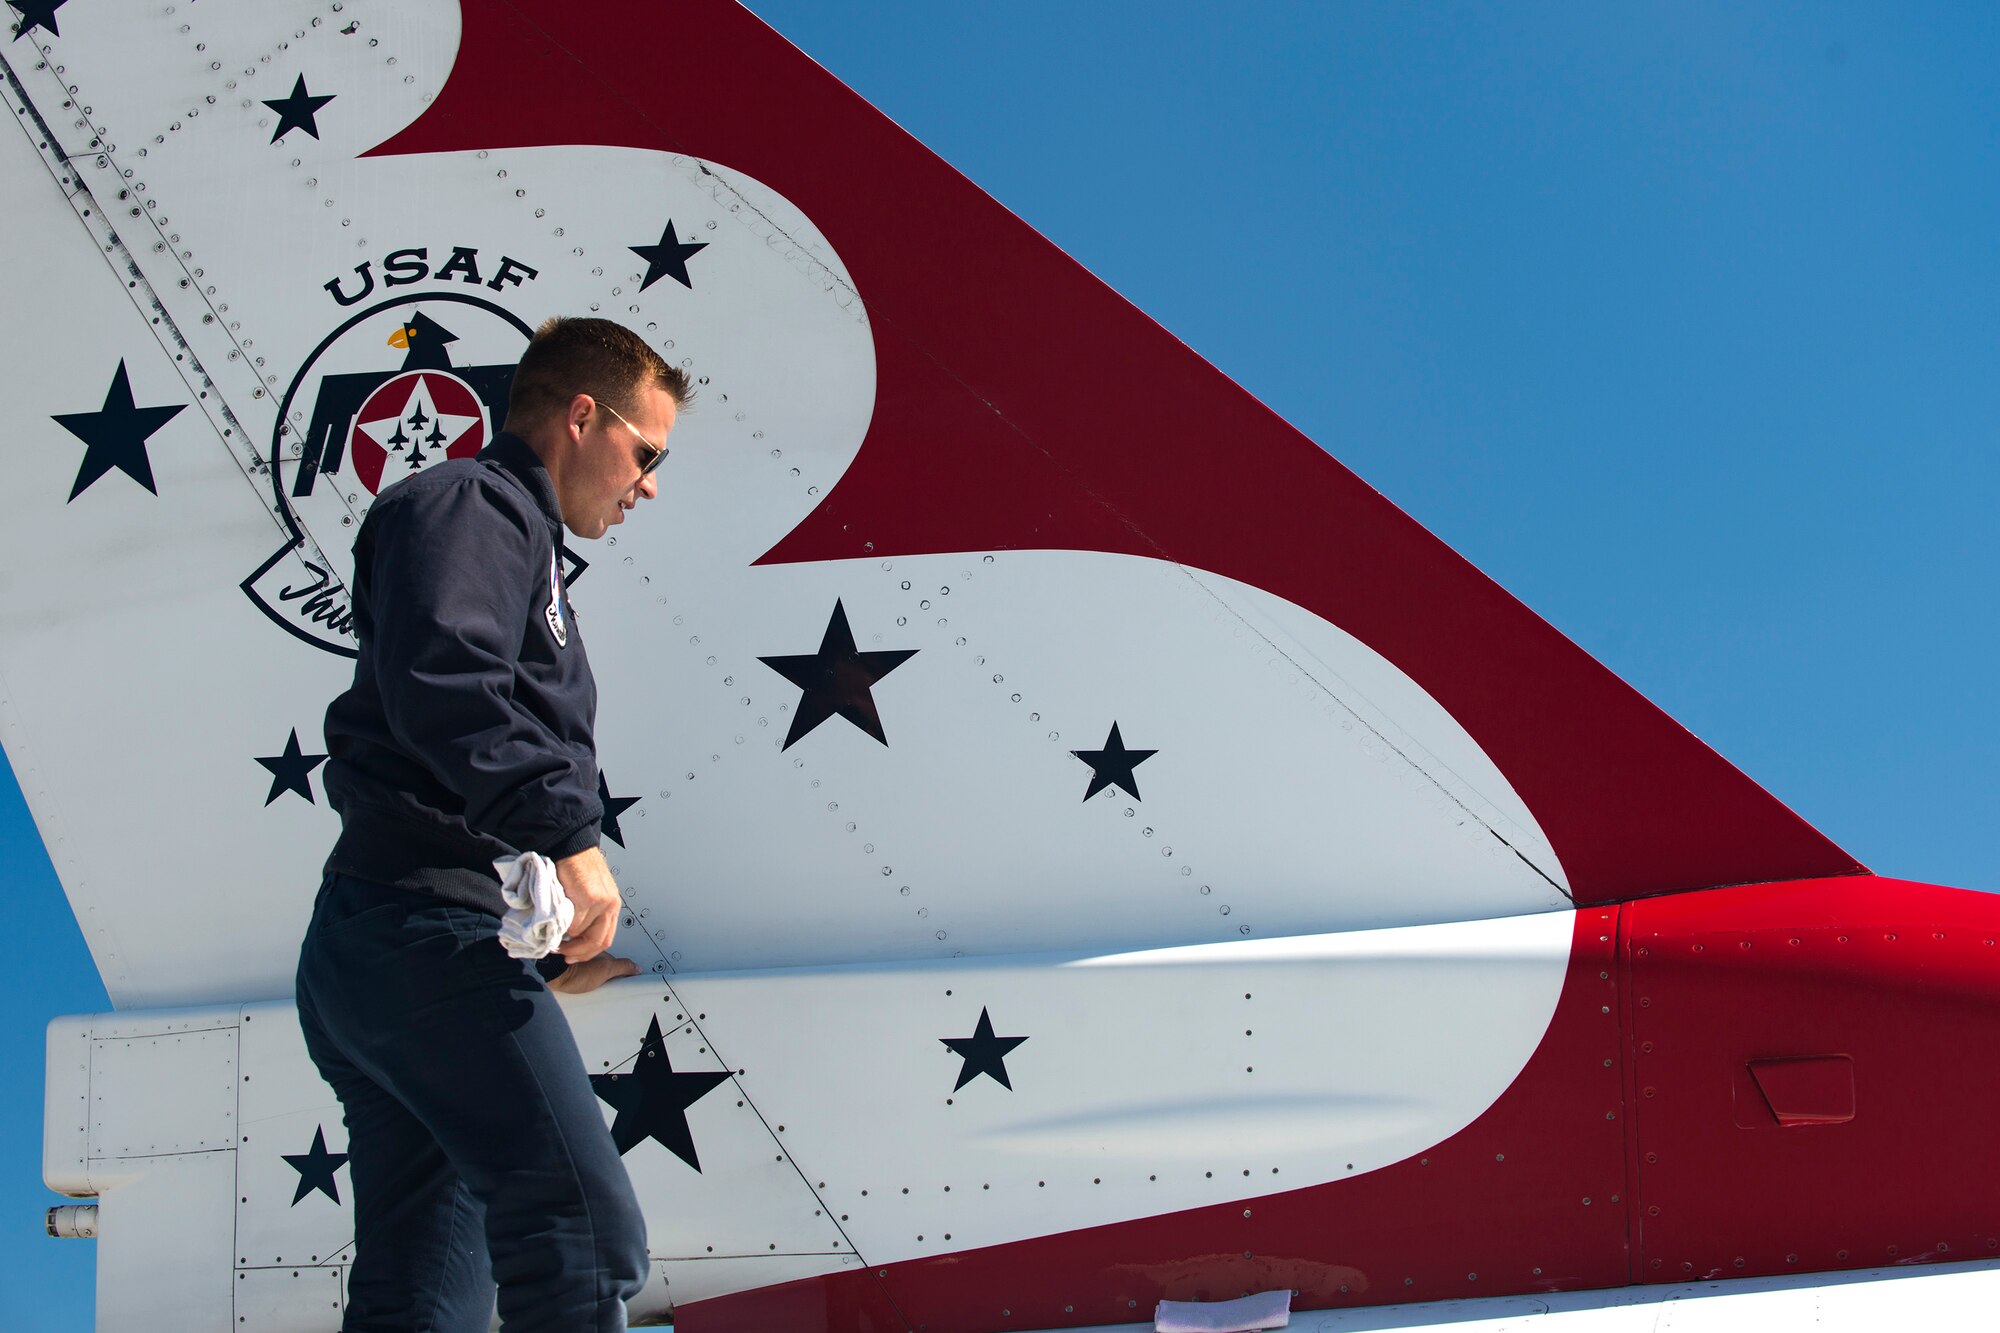 A U.S. Air Force Thunderbird maintainer cleans an F-16C Fighting Falcon during the Thunder Over South Georgia Air Show, Oct. 29, 2017, at Moody Air Force Base, Ga. The Thunderbirds, based out of Nellis Air Force Base, Nev., are the Air Force’s premier aerial demonstration team, performing at air shows and special events worldwide. (U.S. Air Force photo by Airman 1st Class Erick Requadt)